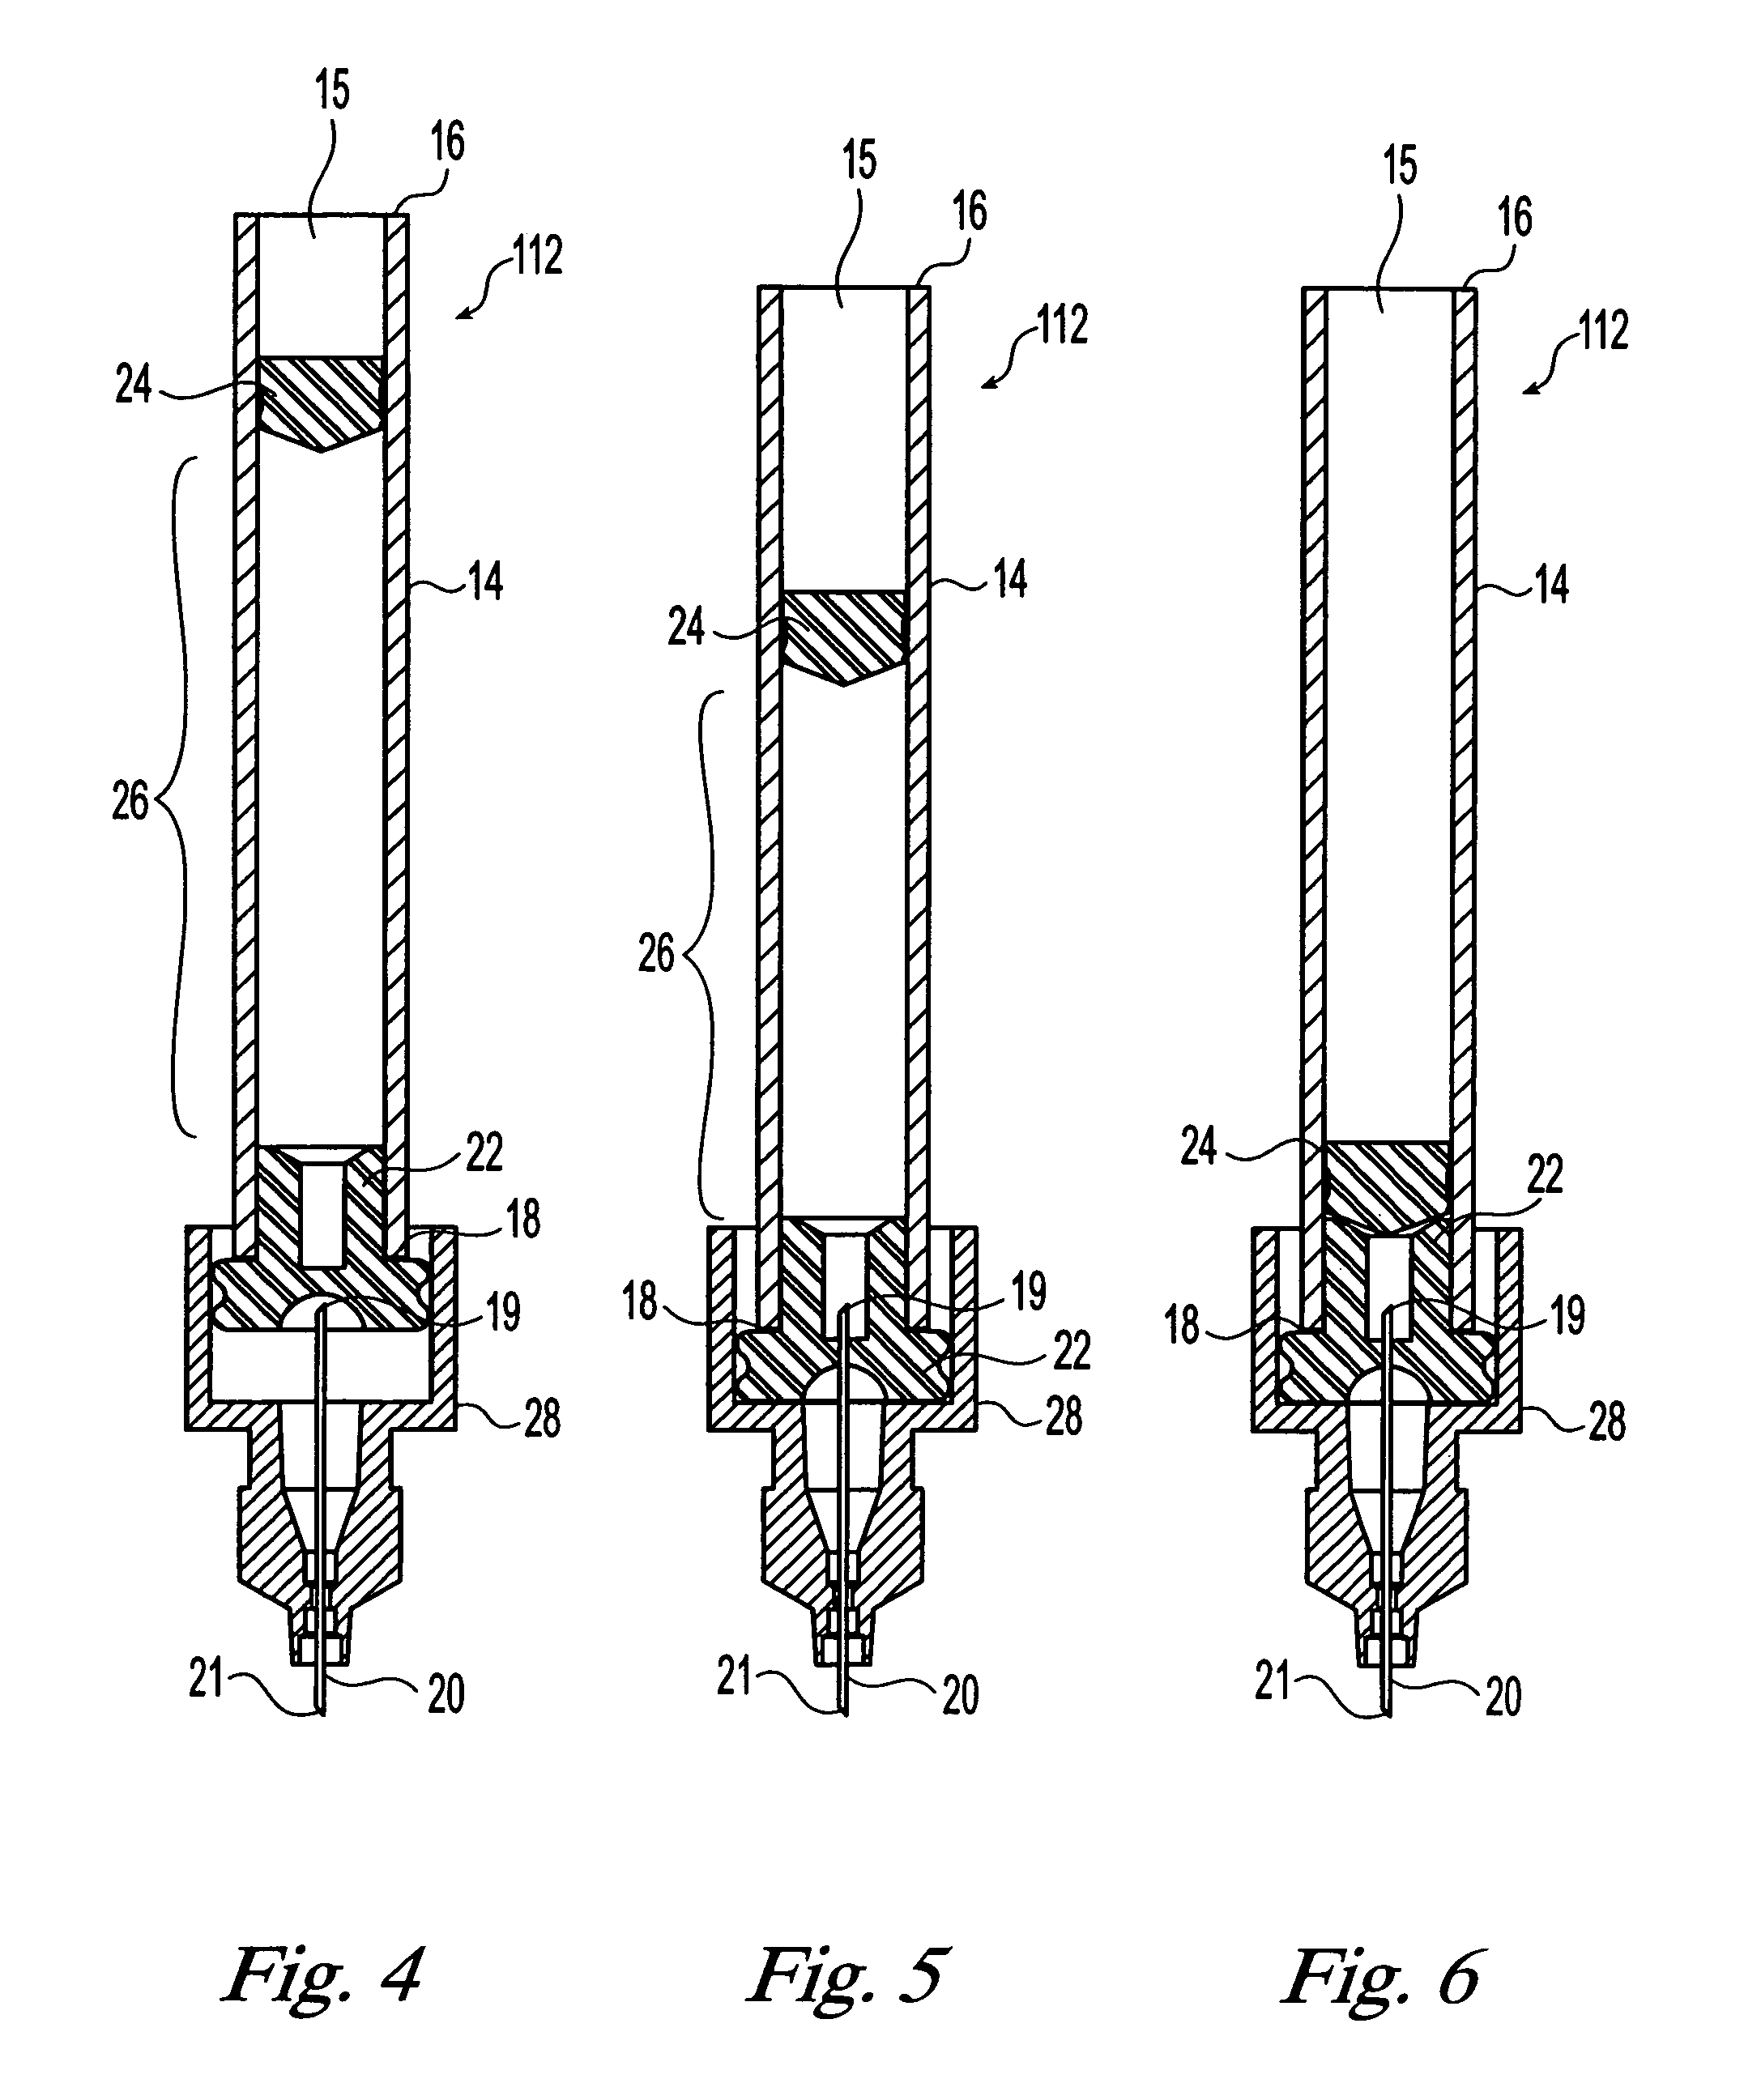 Medicament cartridge and injection device